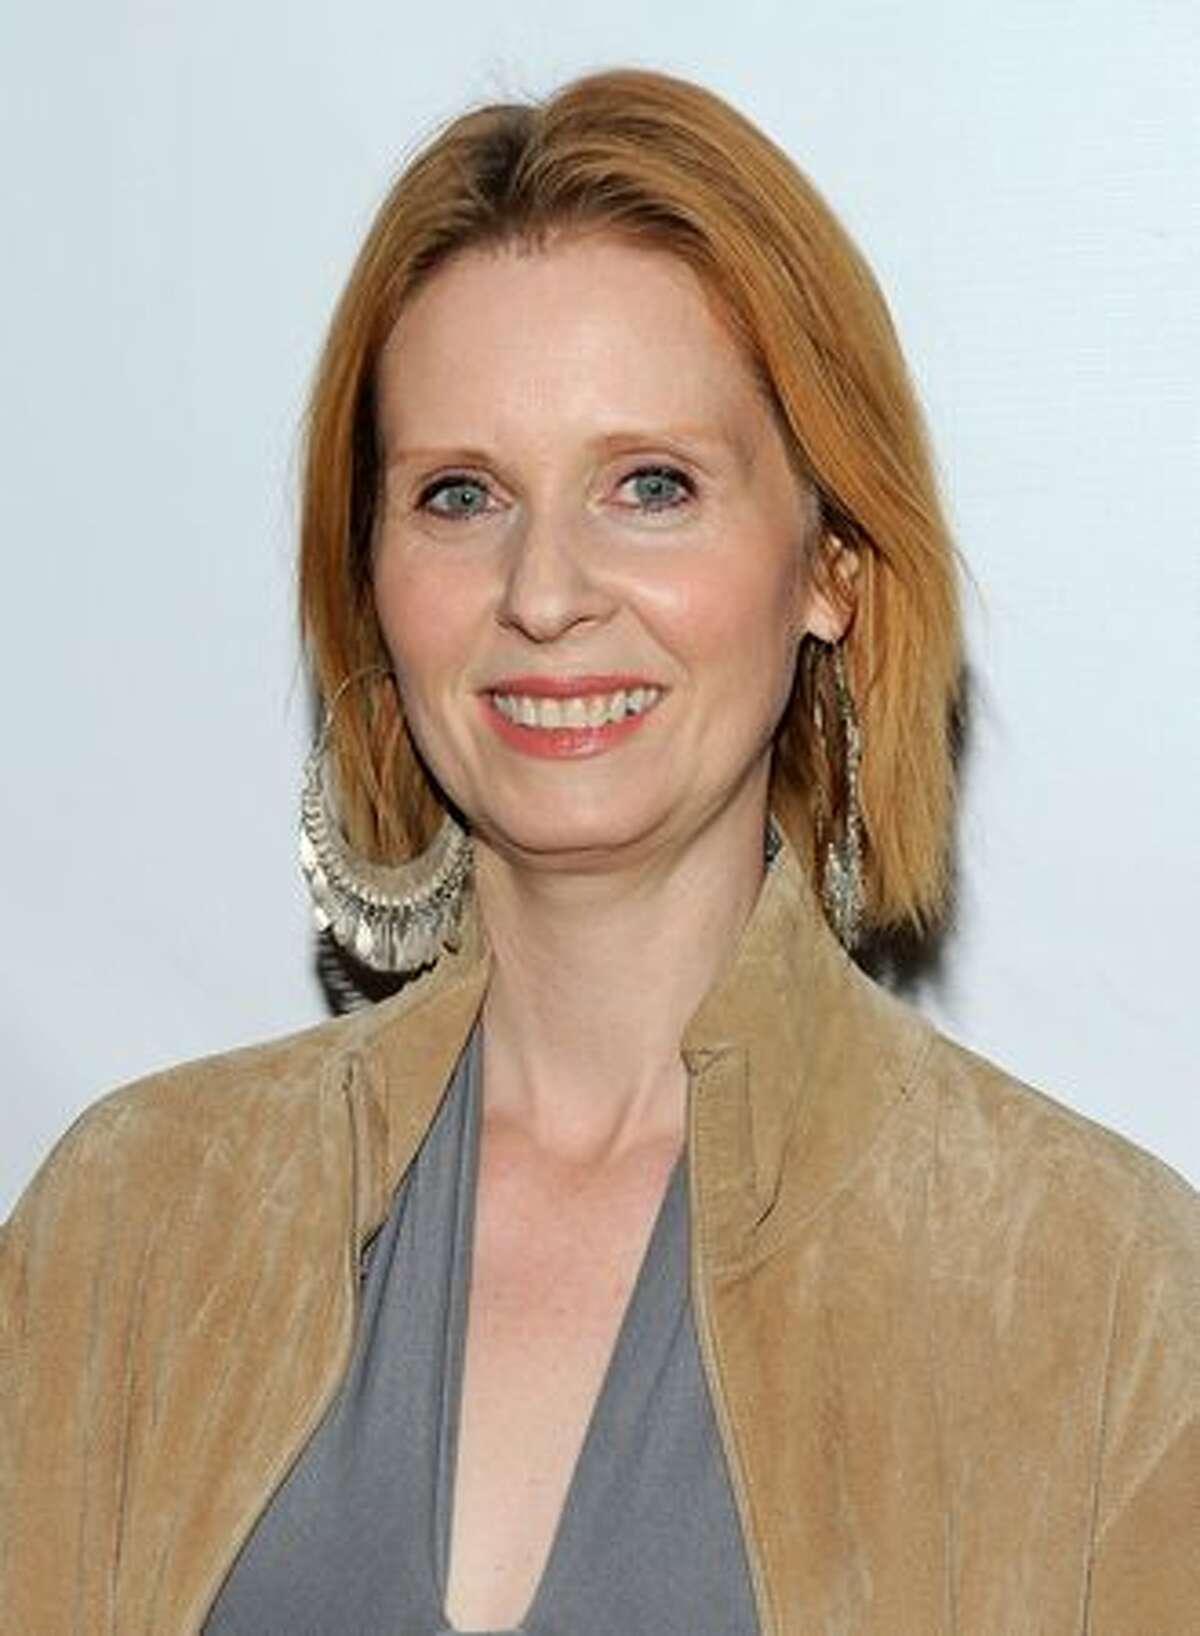 Actress Cynthia Nixon attends the Broadway opening of "RED" at the John Golden Theatre in New York City.